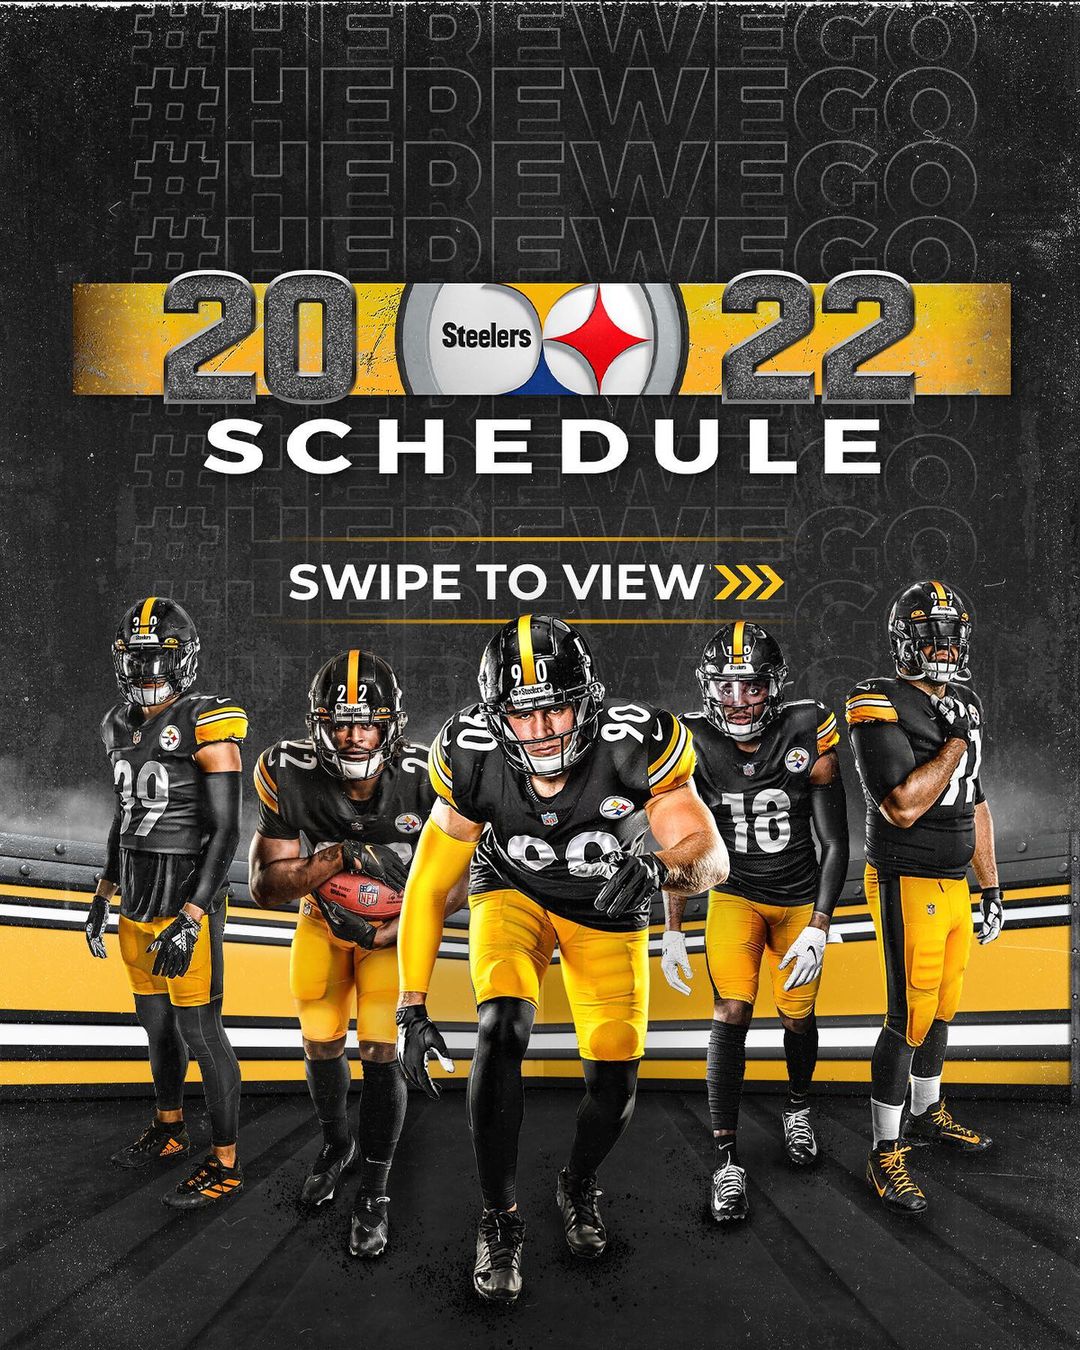 Our 2022 schedule is here #HereWeGo   : Watch NFL Schedule Release '22 on @nflne...